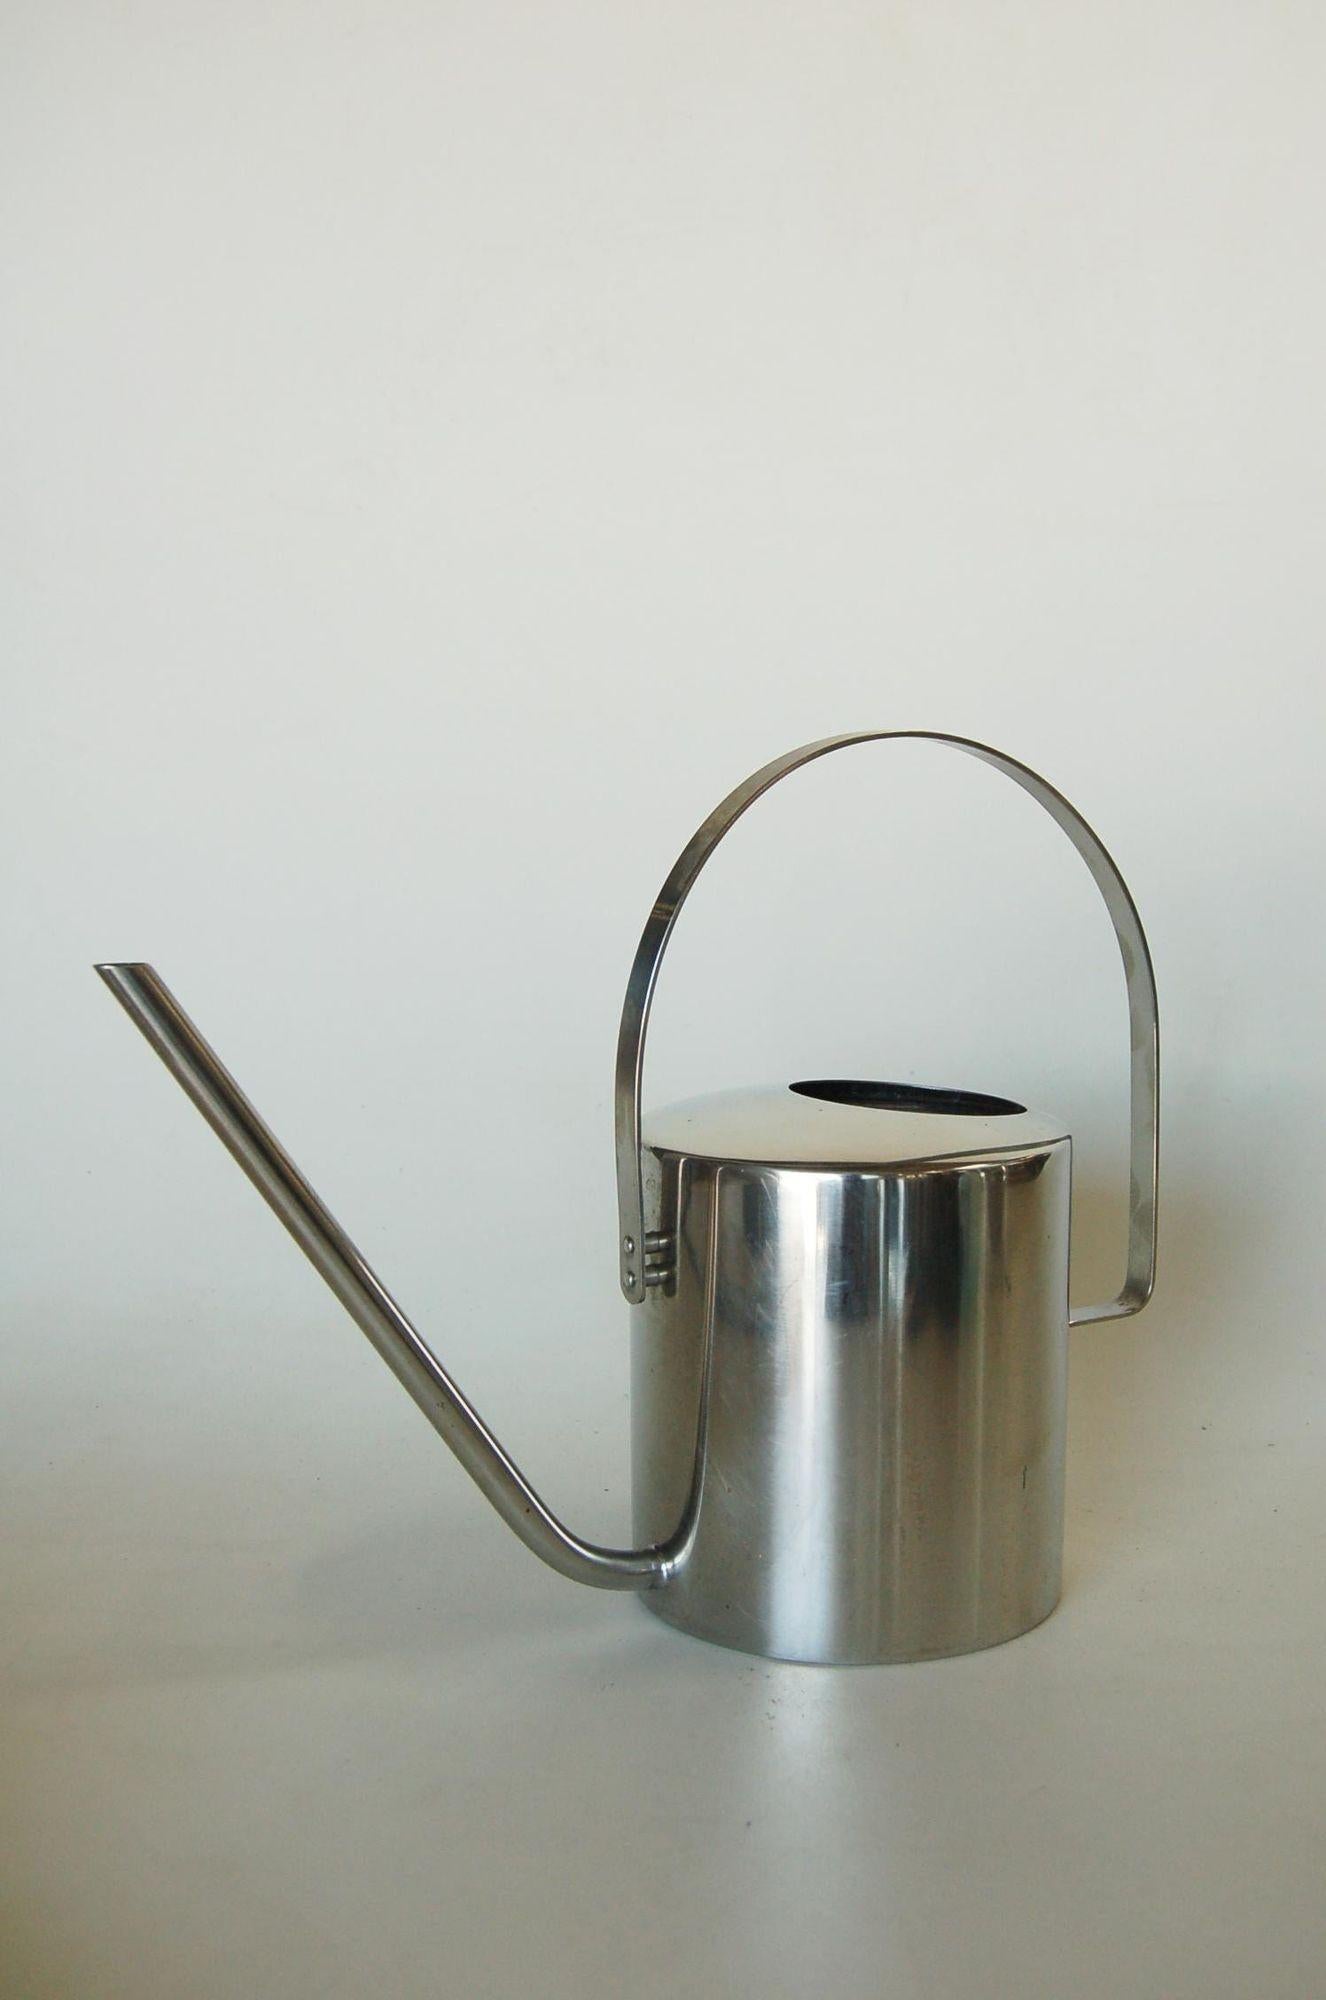 Metal Original Flower Watering Can Created by Peter Holmblad for Stelton, Circa 1978